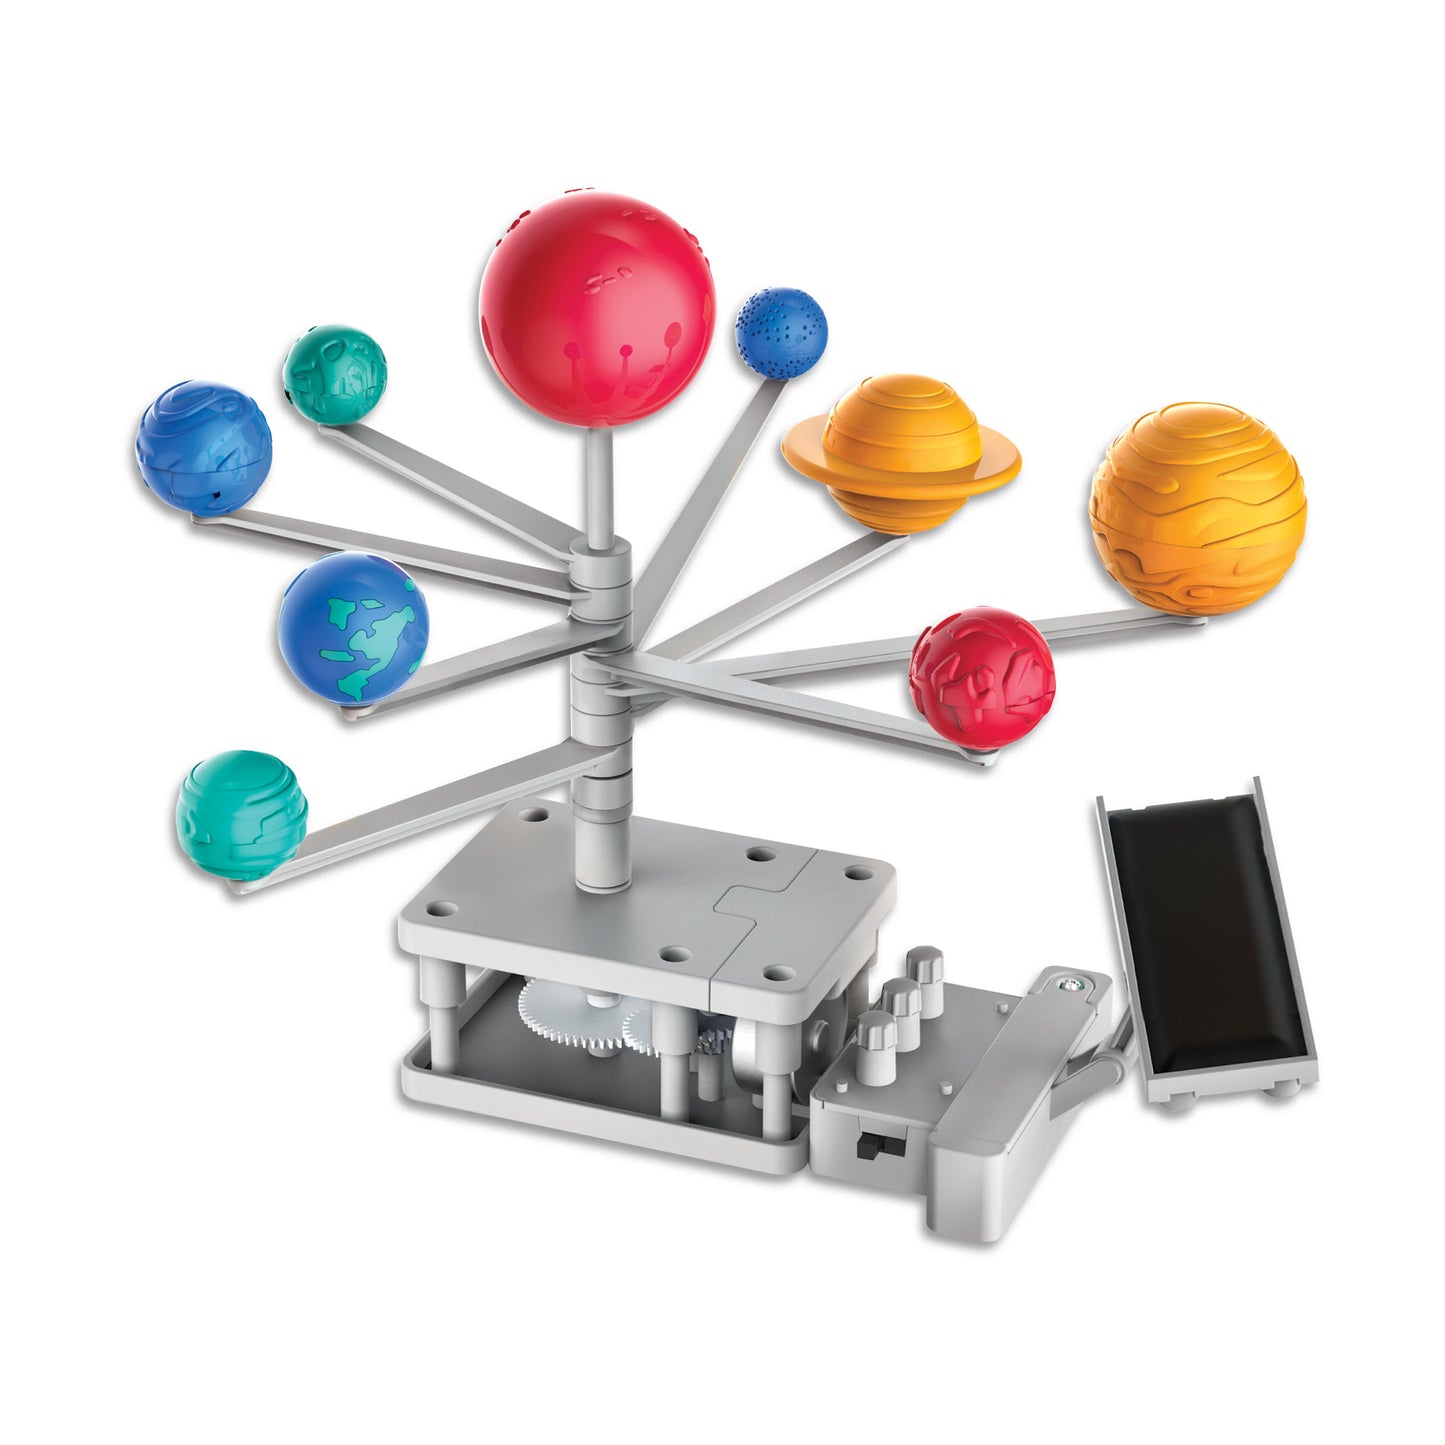 4M - GREEN SCIENCE - SOLAR SYSTEM TOY